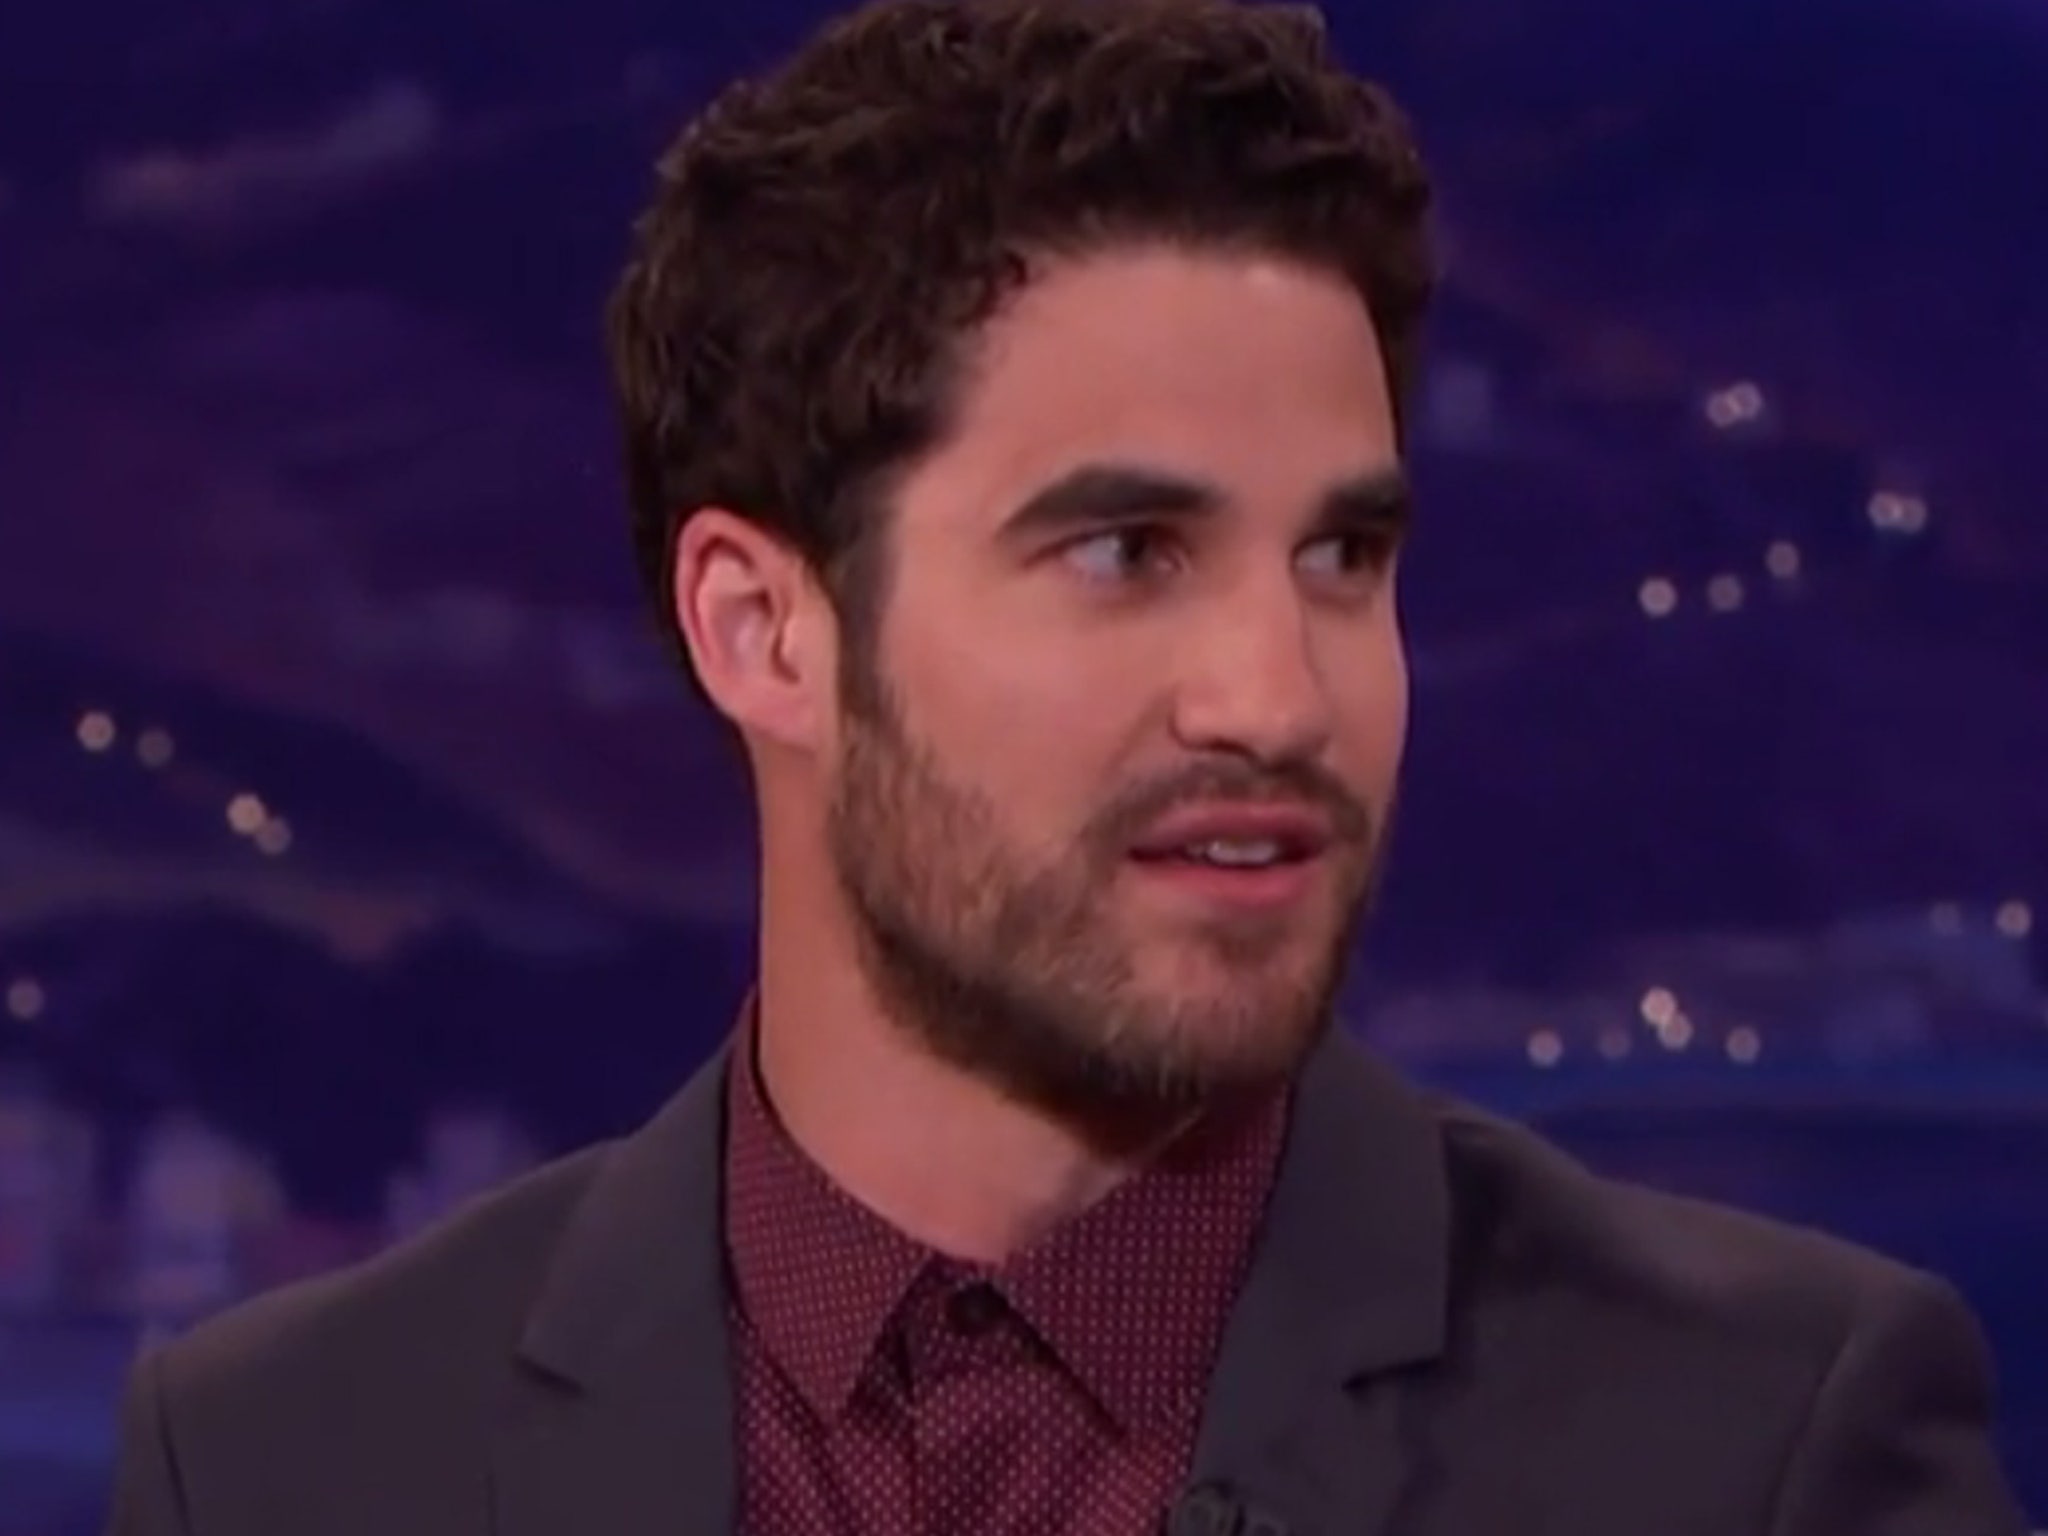 who is the gay porn star darren criss kisses